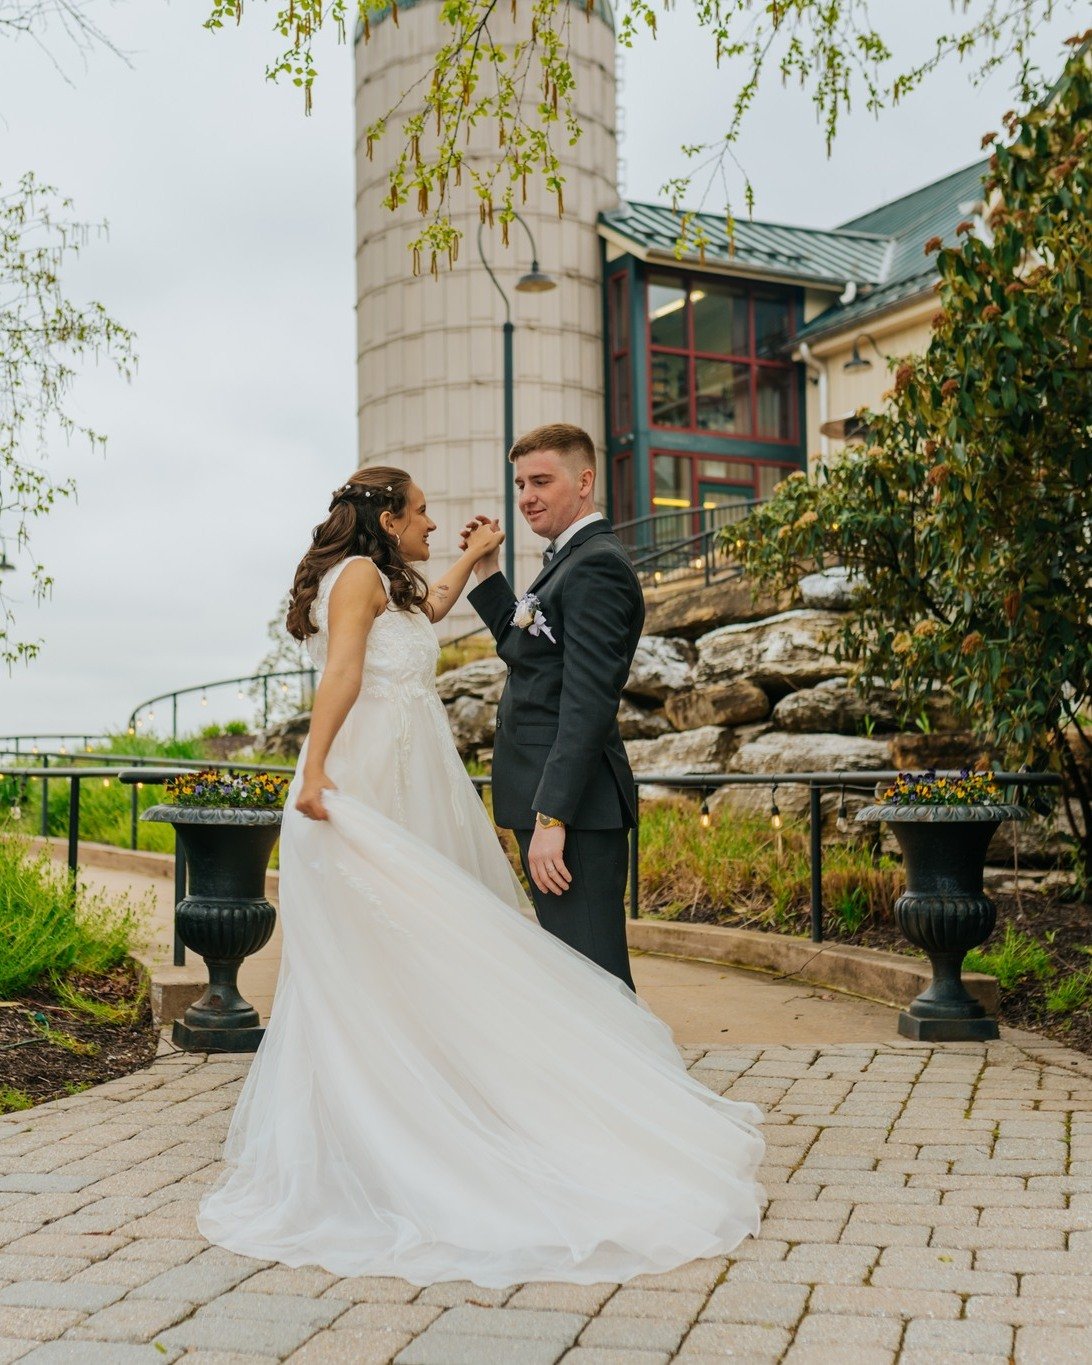 Courtney and Matt had a beautiful wedding at The Barn At Stoner Commons. I love getting the honor of capturing a friend's big day!

#weddingvideo #weddingvideos #weddingphoto #weddingphotos #lancasterwedding #lancasterweddings #lancasterweddingphotog